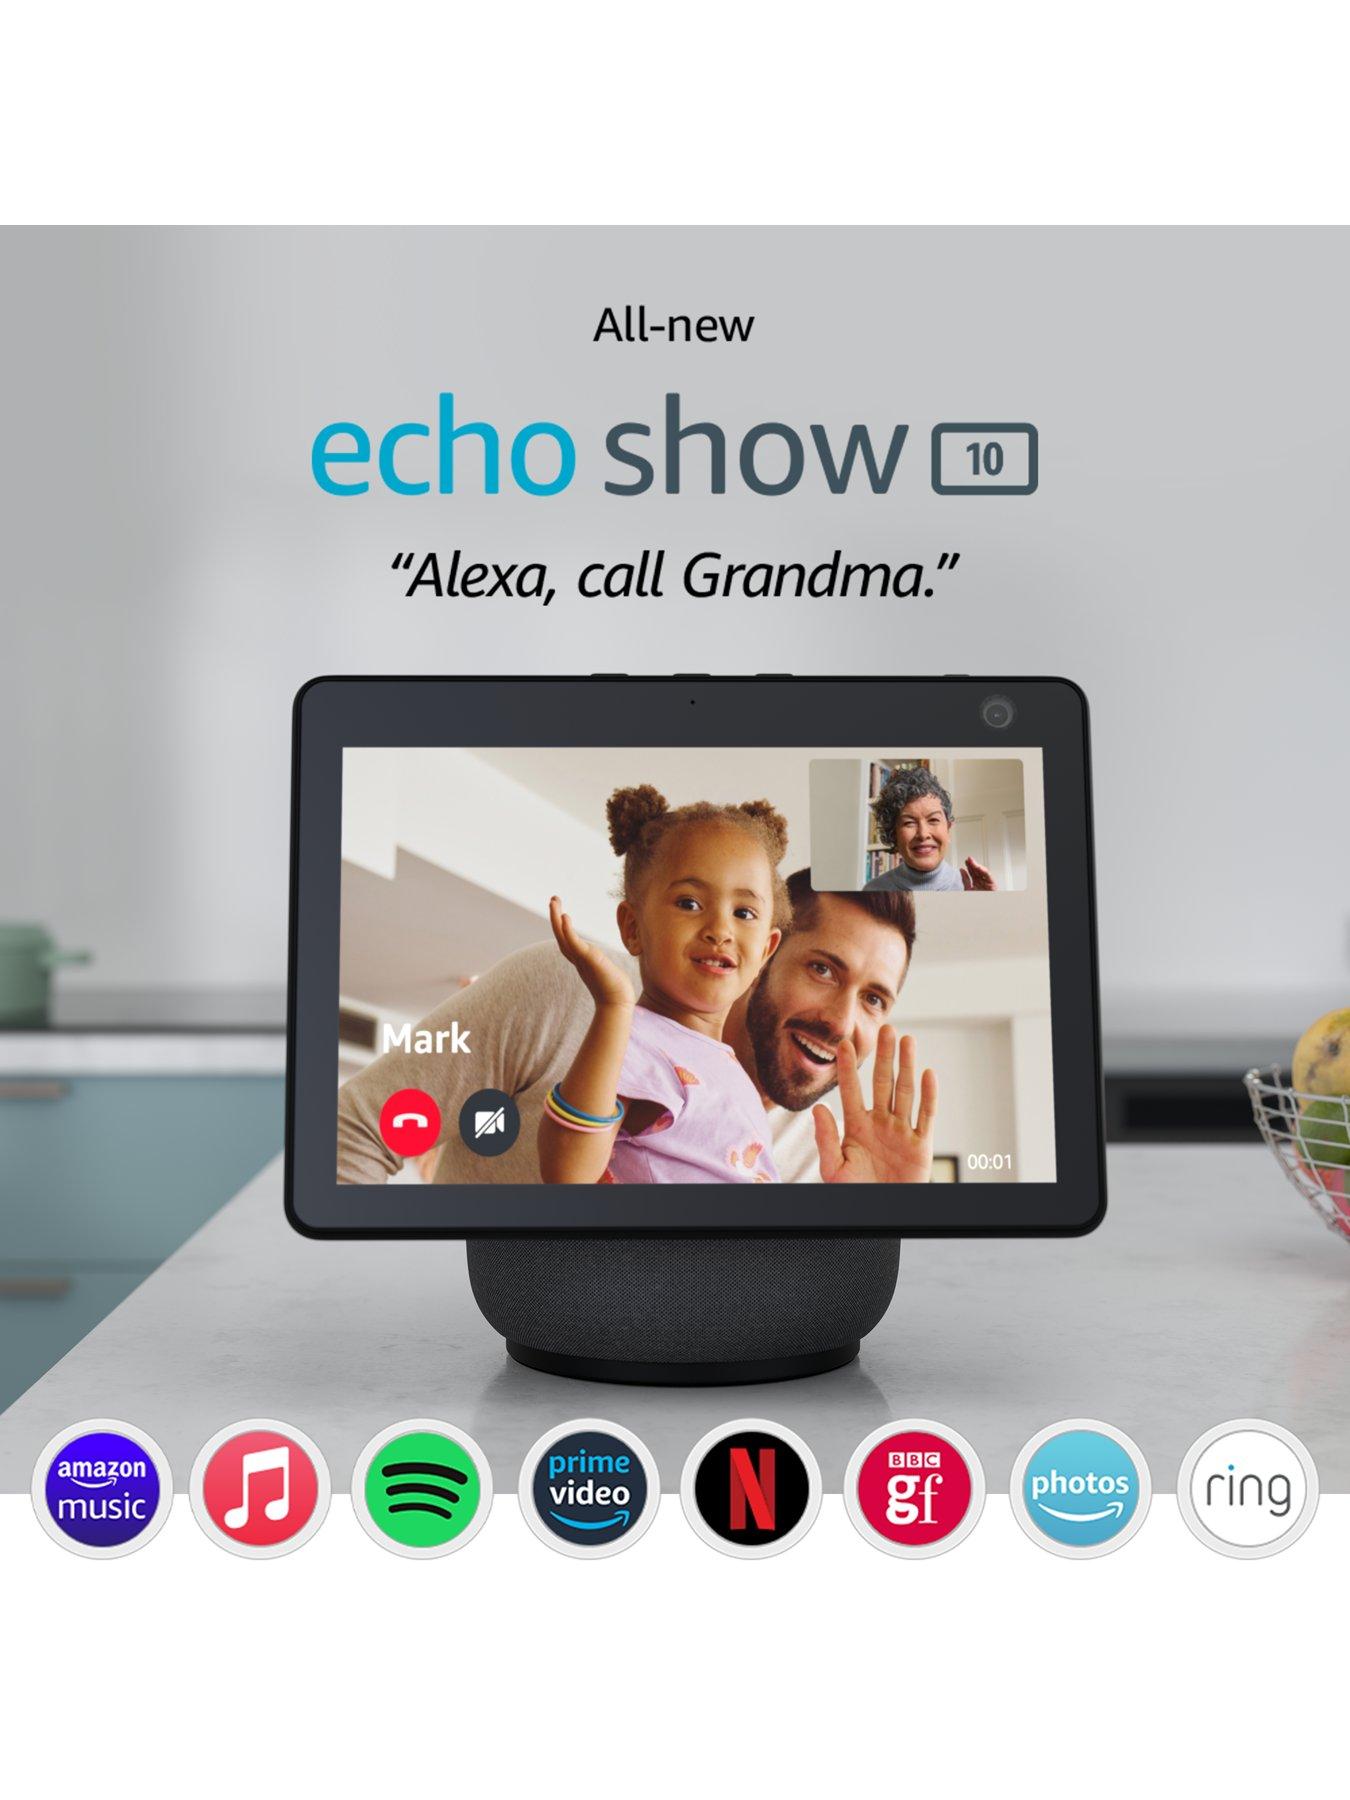 Echo Show 10 (3rd Gen) HD smart display with motion and